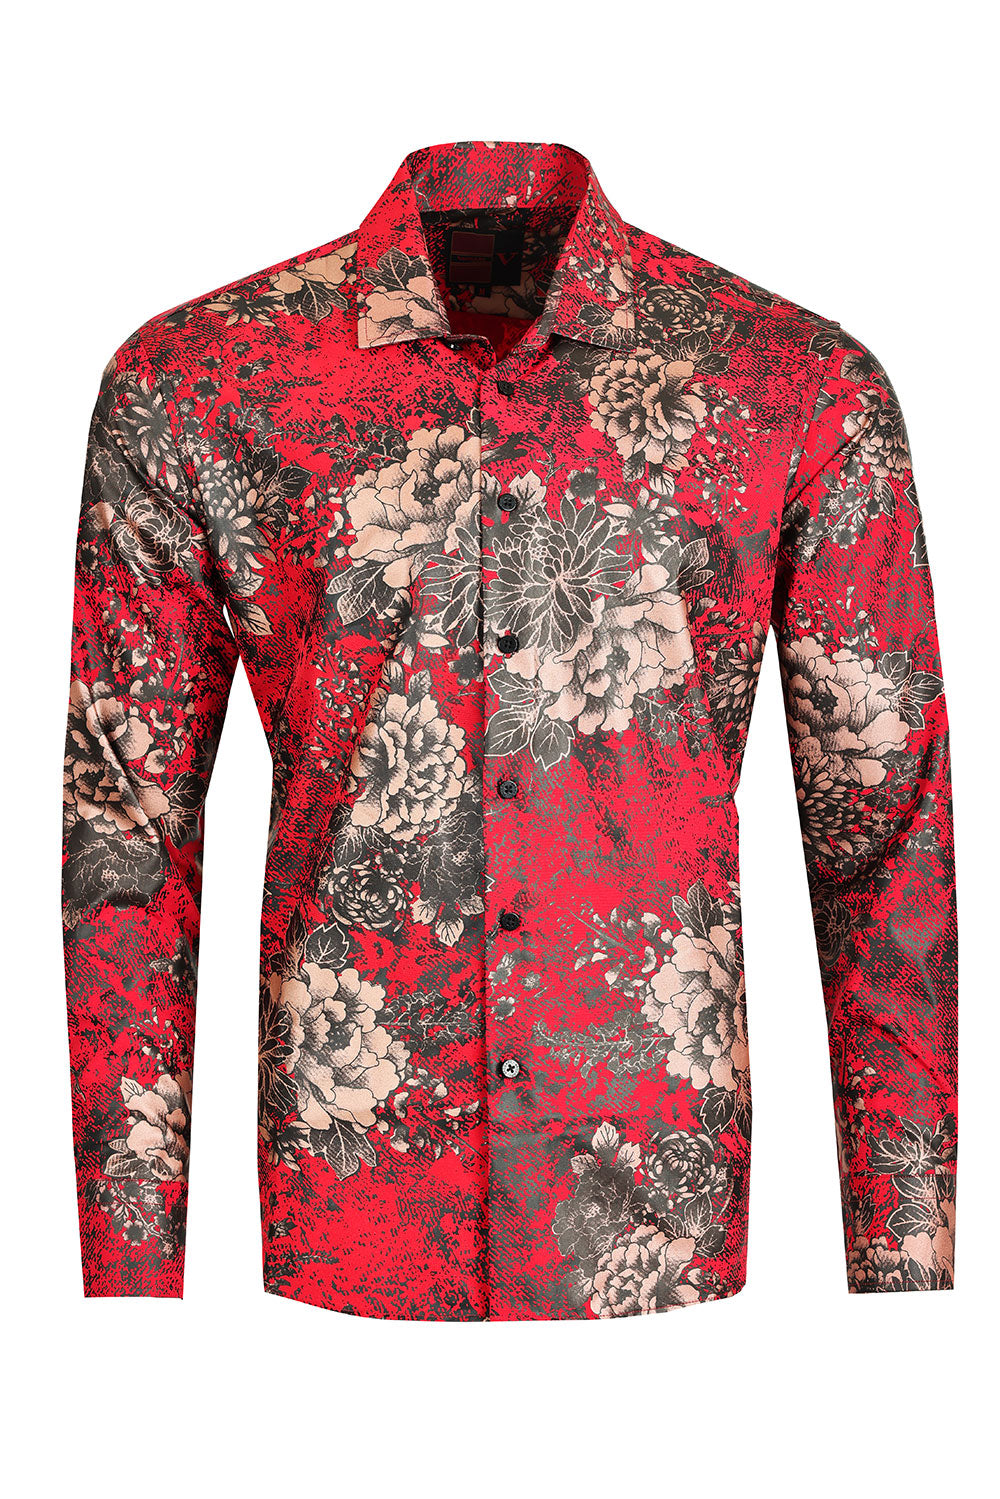 Men's Roses Floral Print Design Button Down Luxury Shirts 2VS180 Red